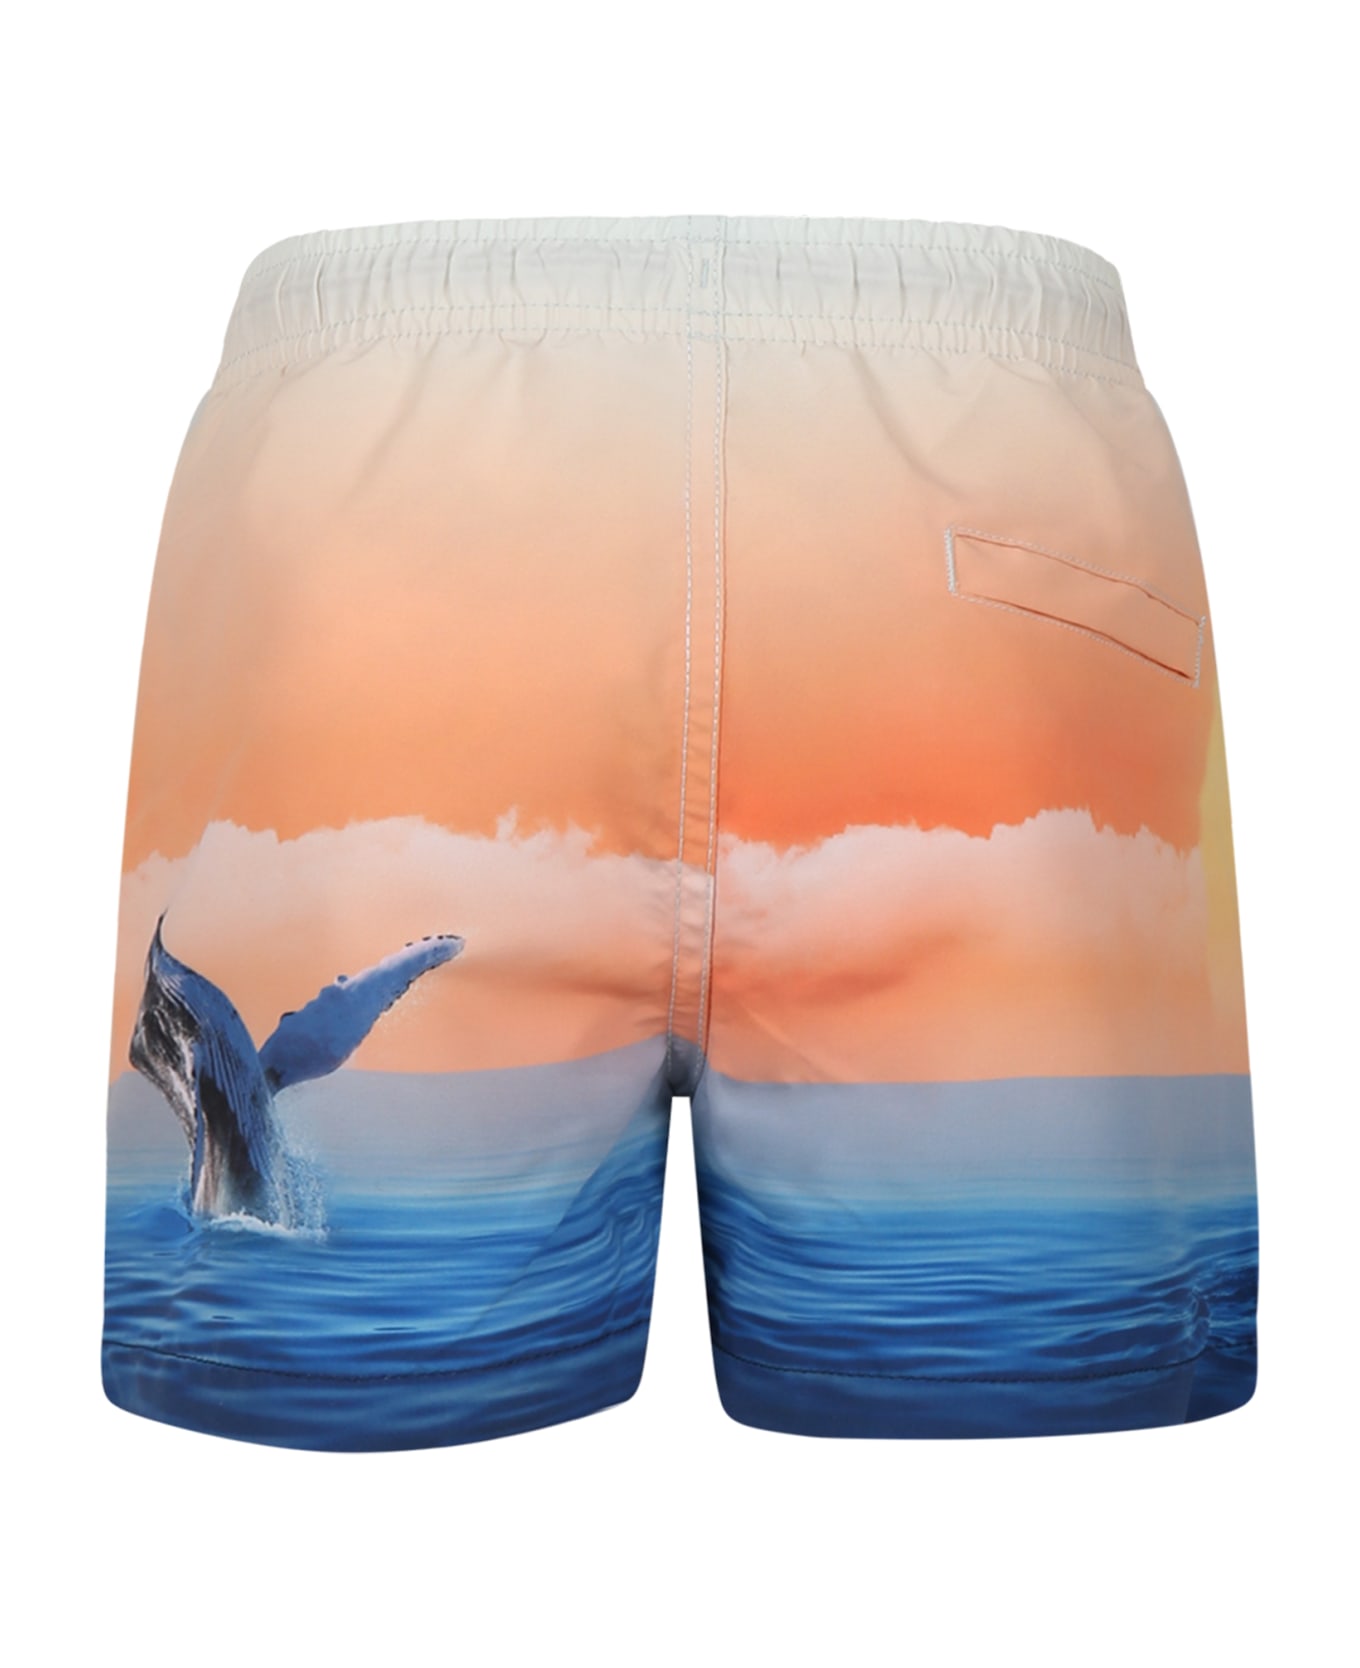 Molo Orange Swimsuit For Boy With Dolphins - Multicolor